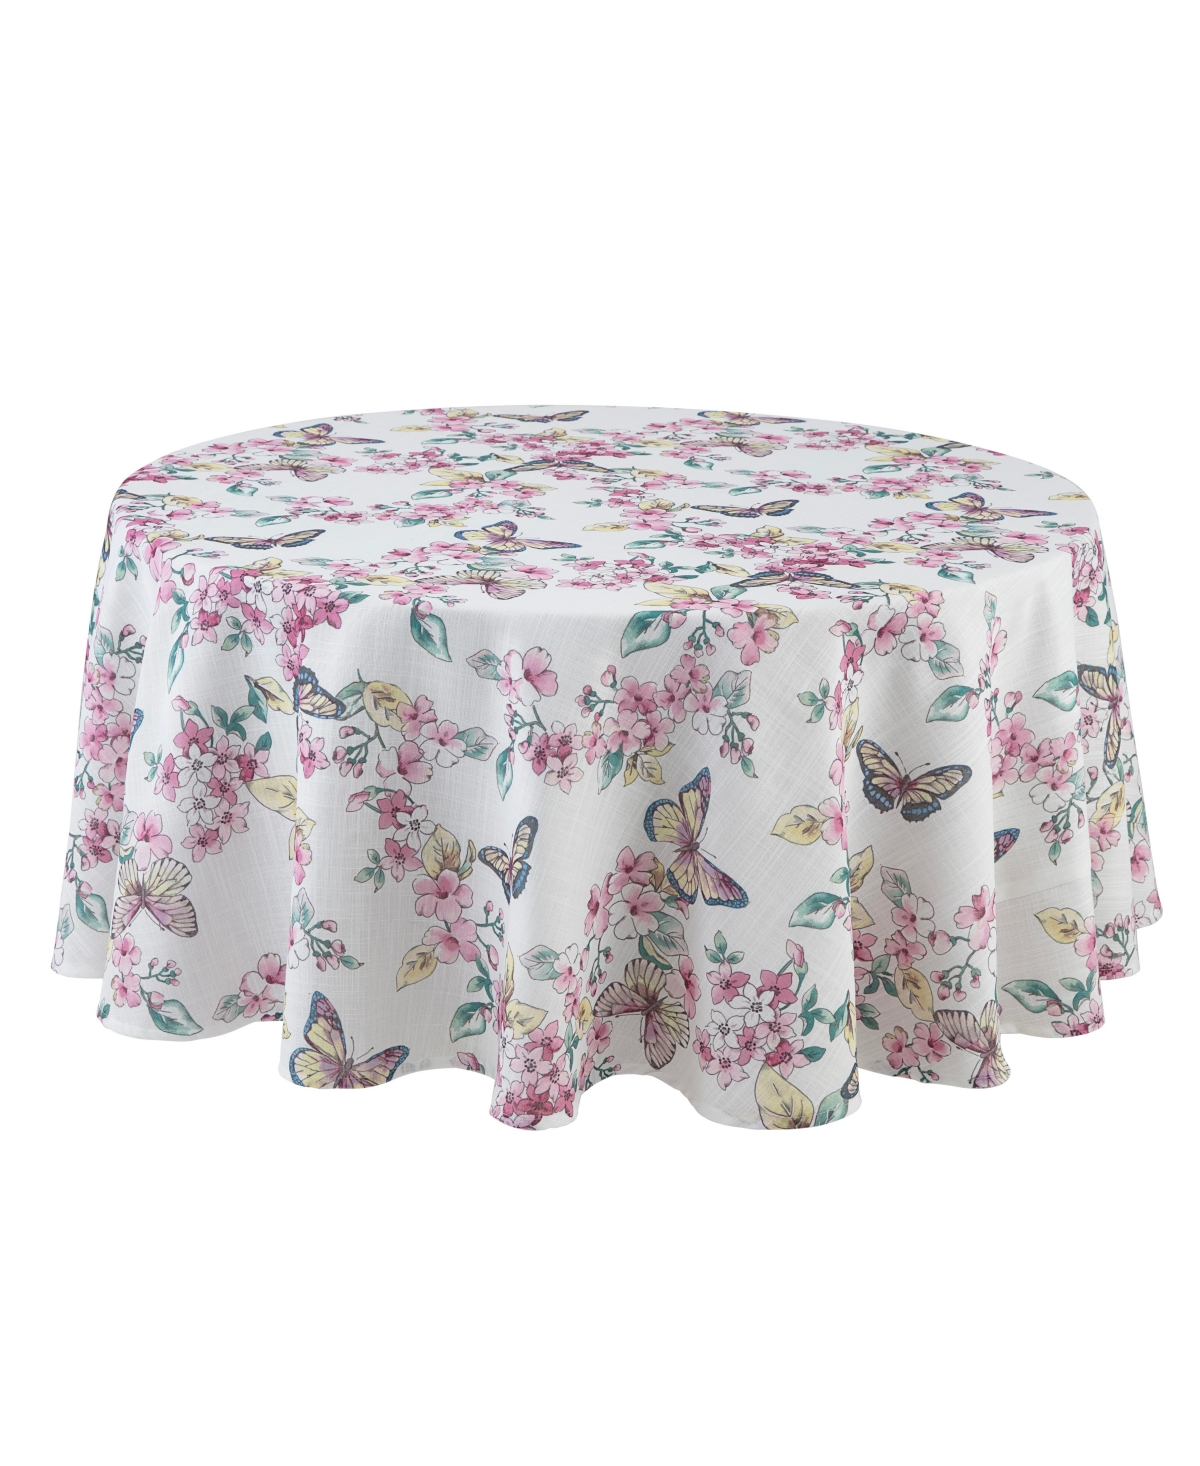 Lenox Butterfly Meadow Floral Tablecloth In White Multi